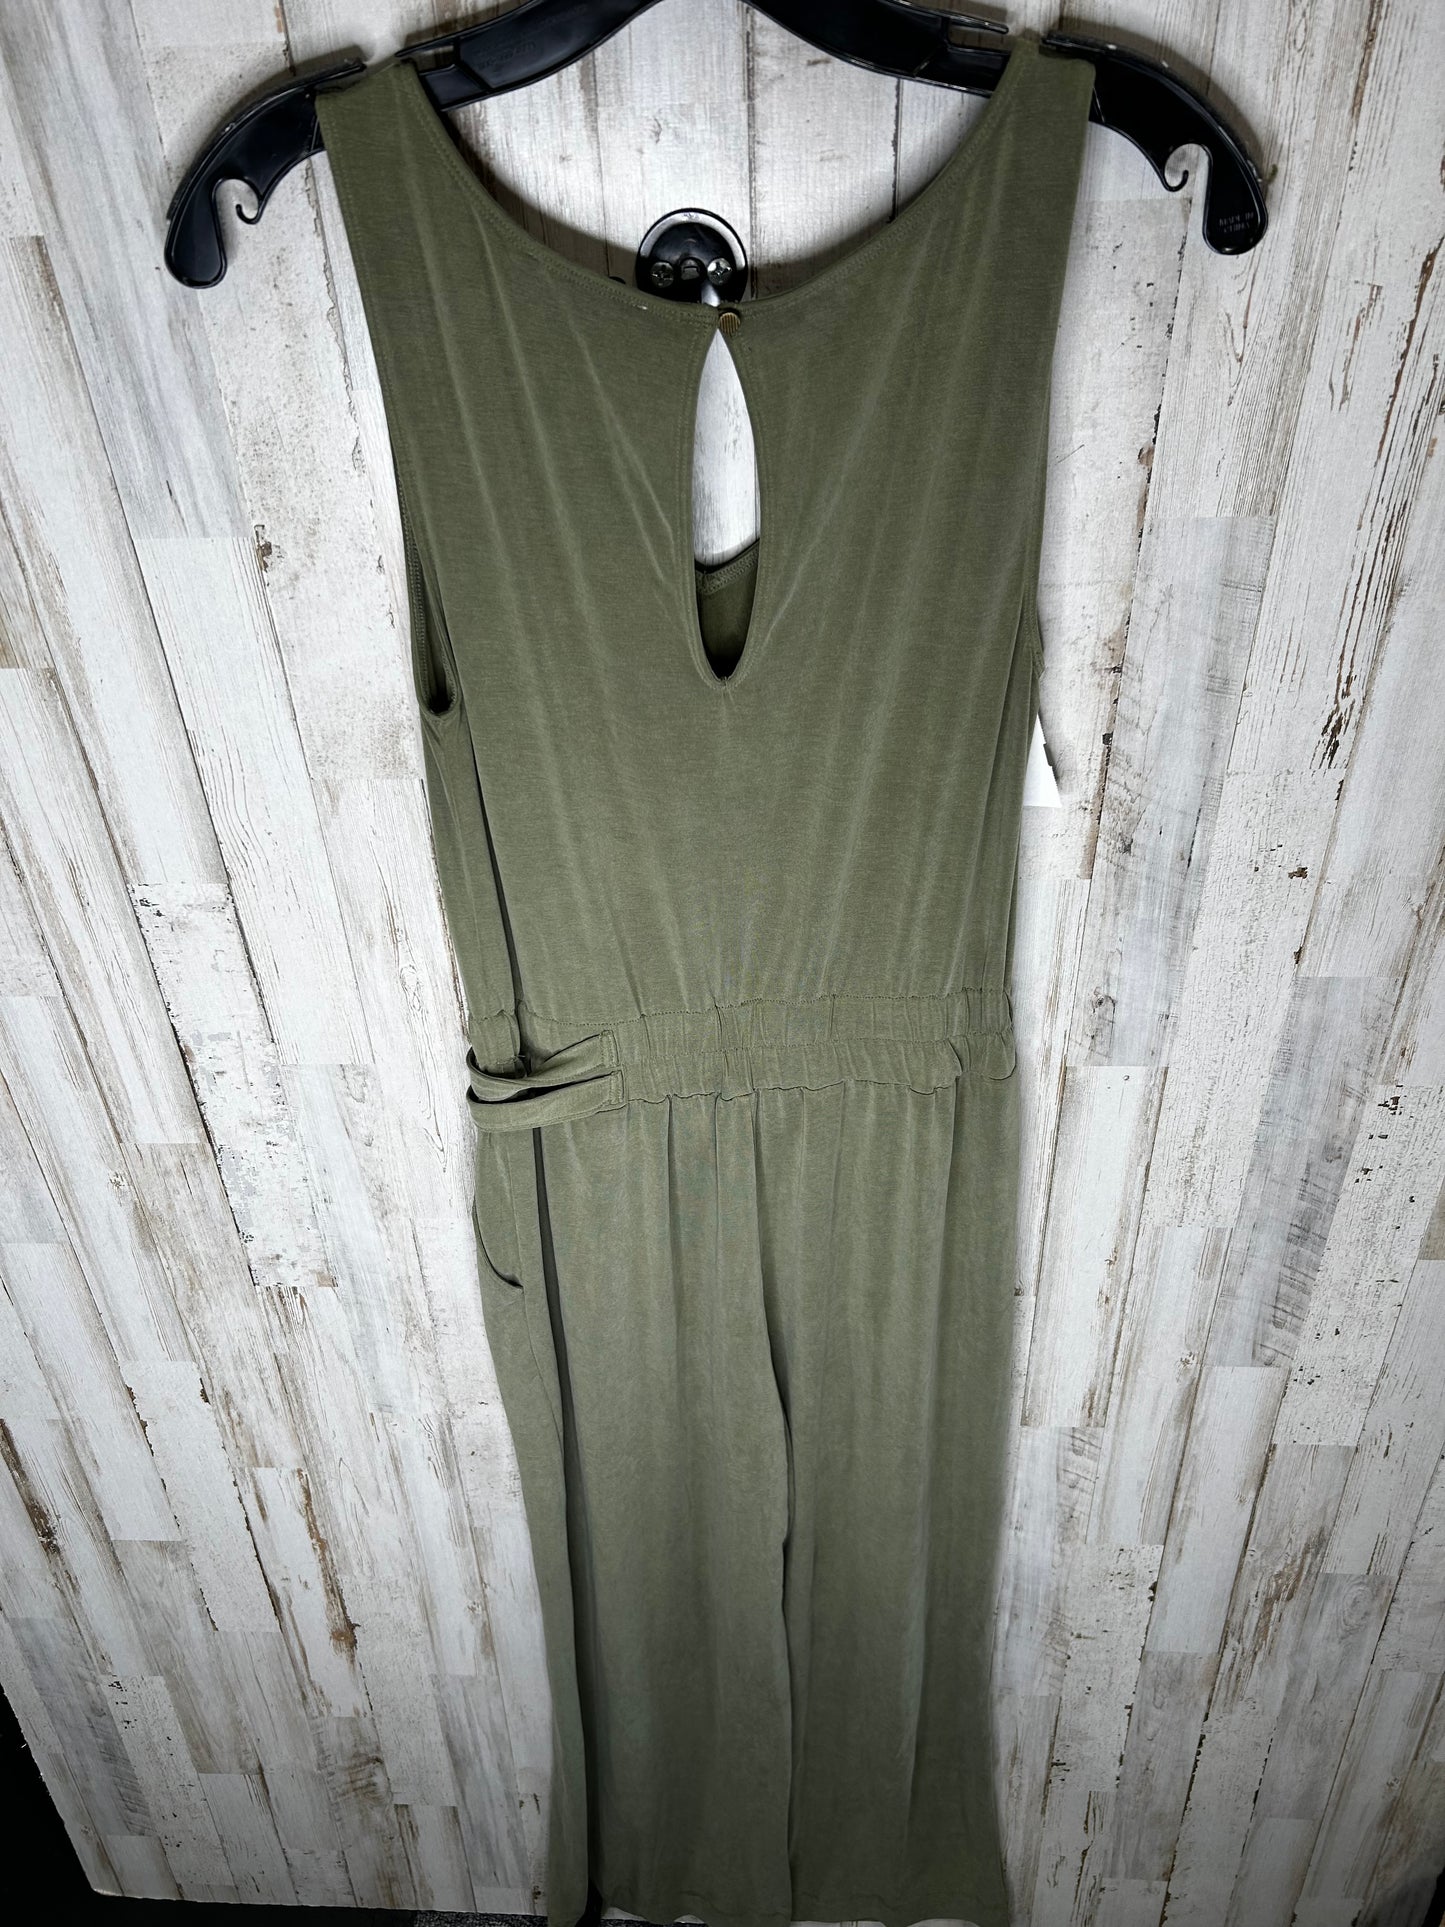 Romper By Anthropologie